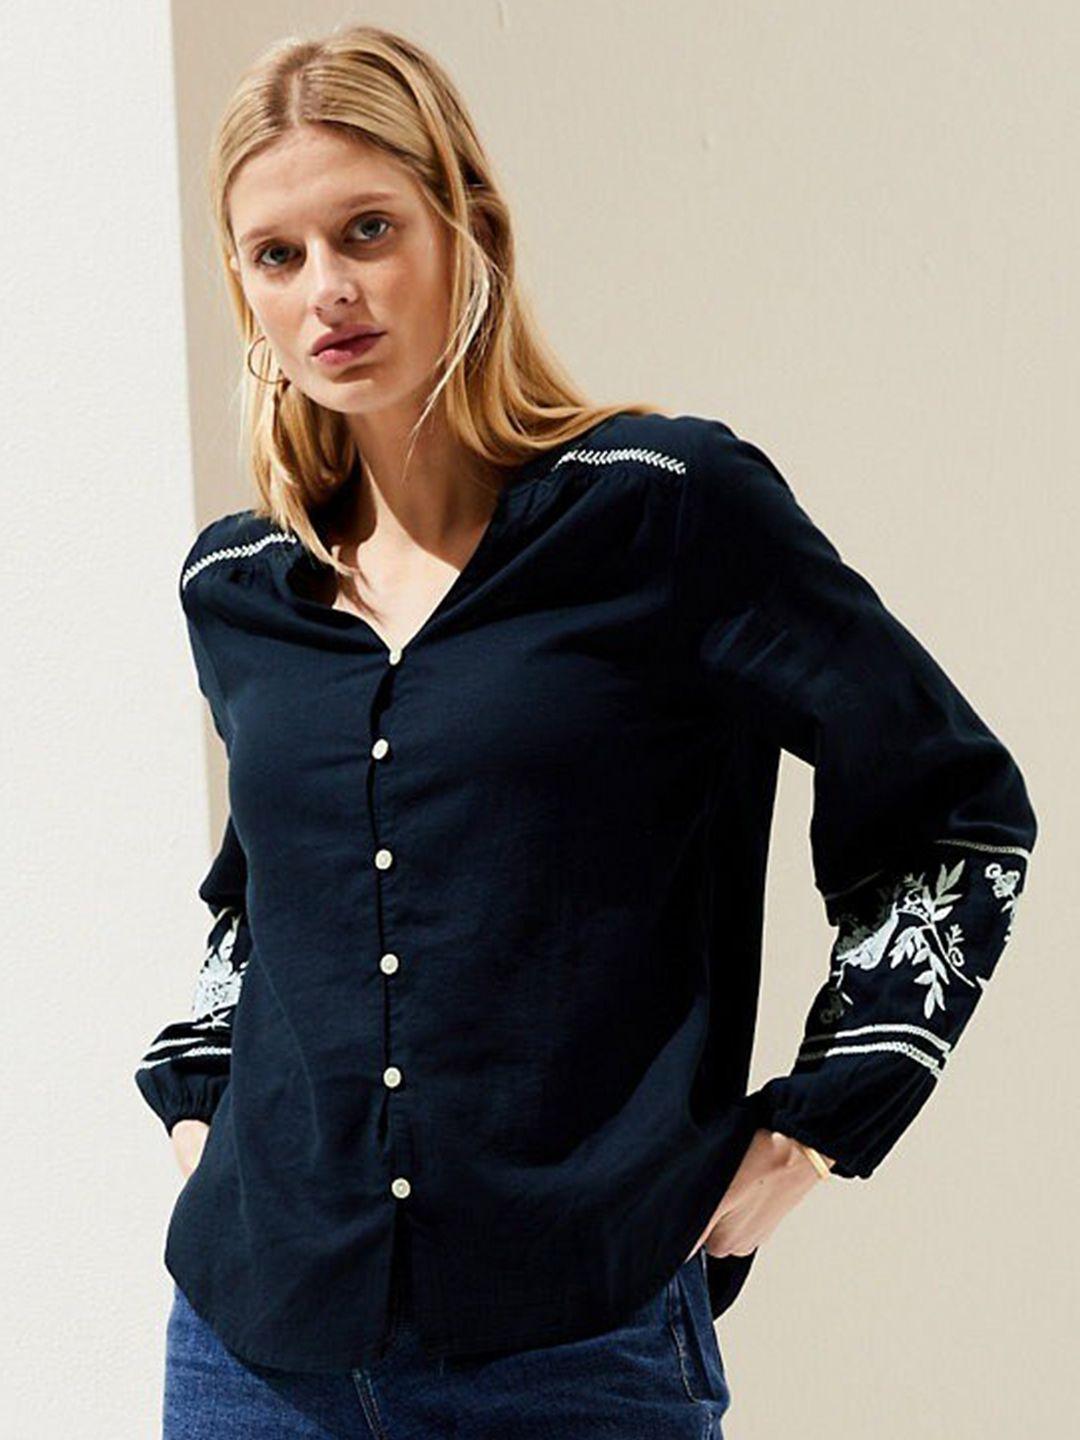 marks & spencer embroidered puff sleeves shirt style top